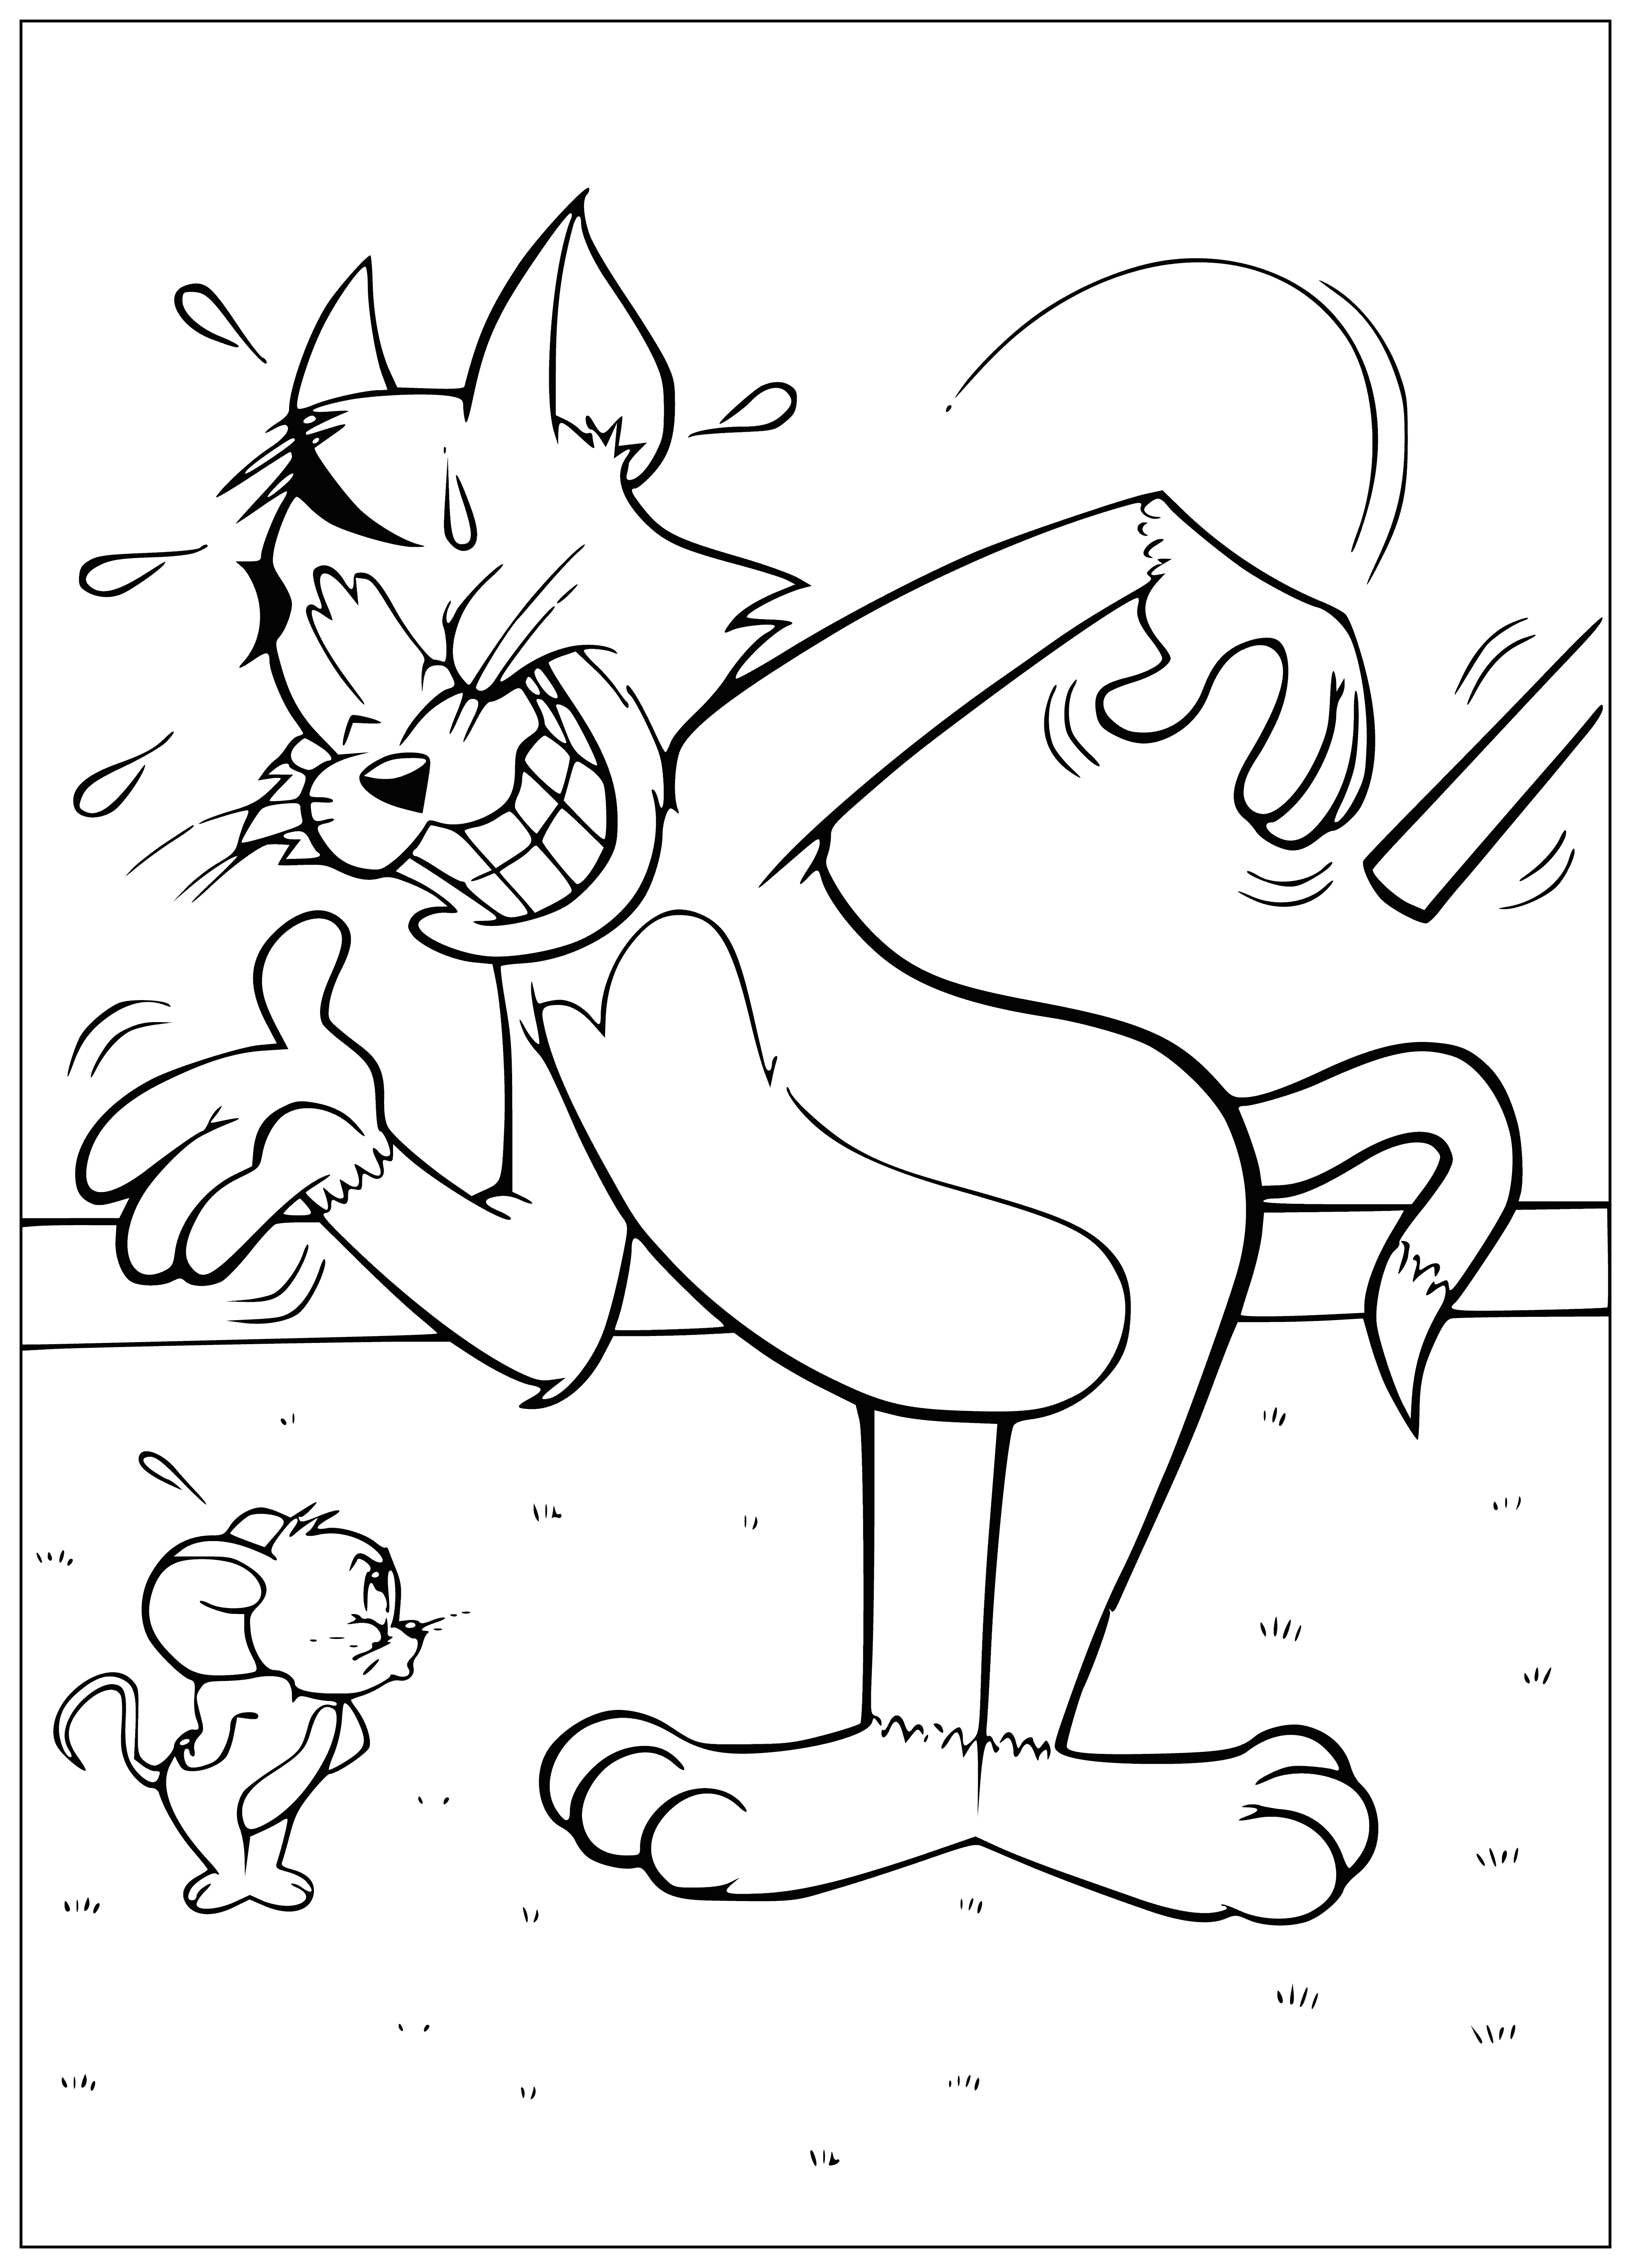 Tom and Jerry coloring page